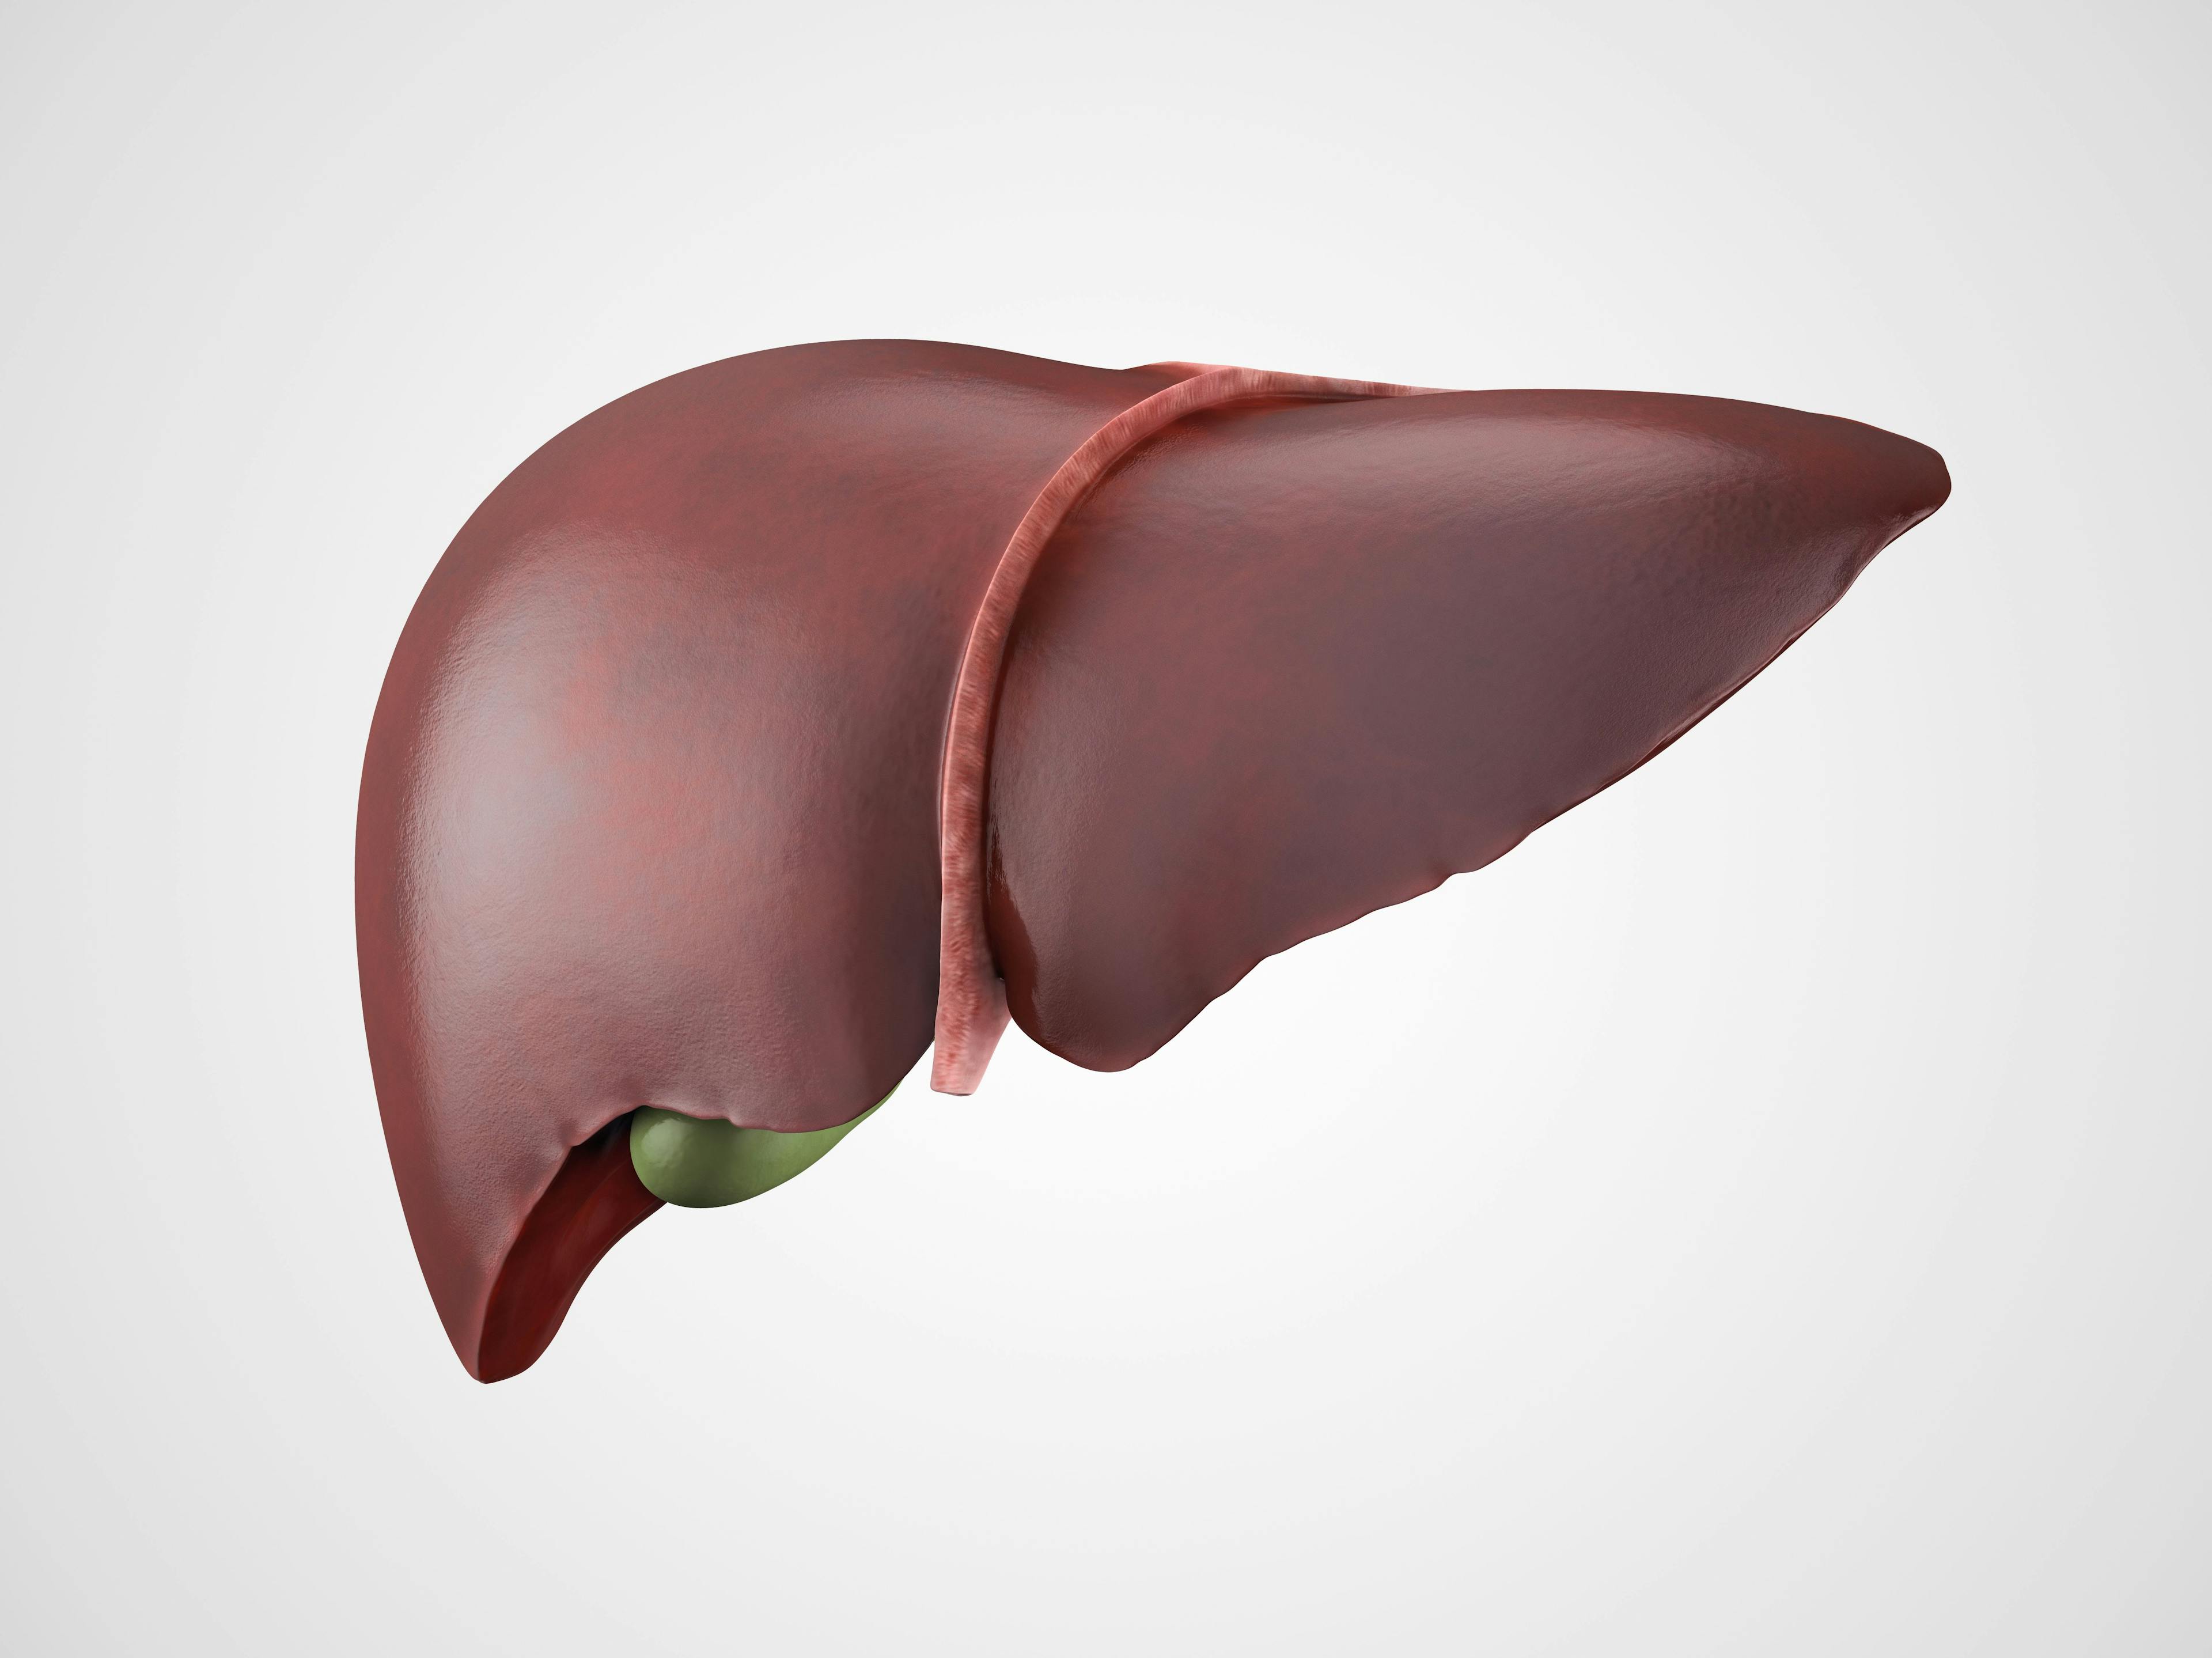 Individuals with nonalcoholic fatty liver disease–related hepatocellular carcinoma were found to have lower rates of surveillance vs other potential causes of disease.